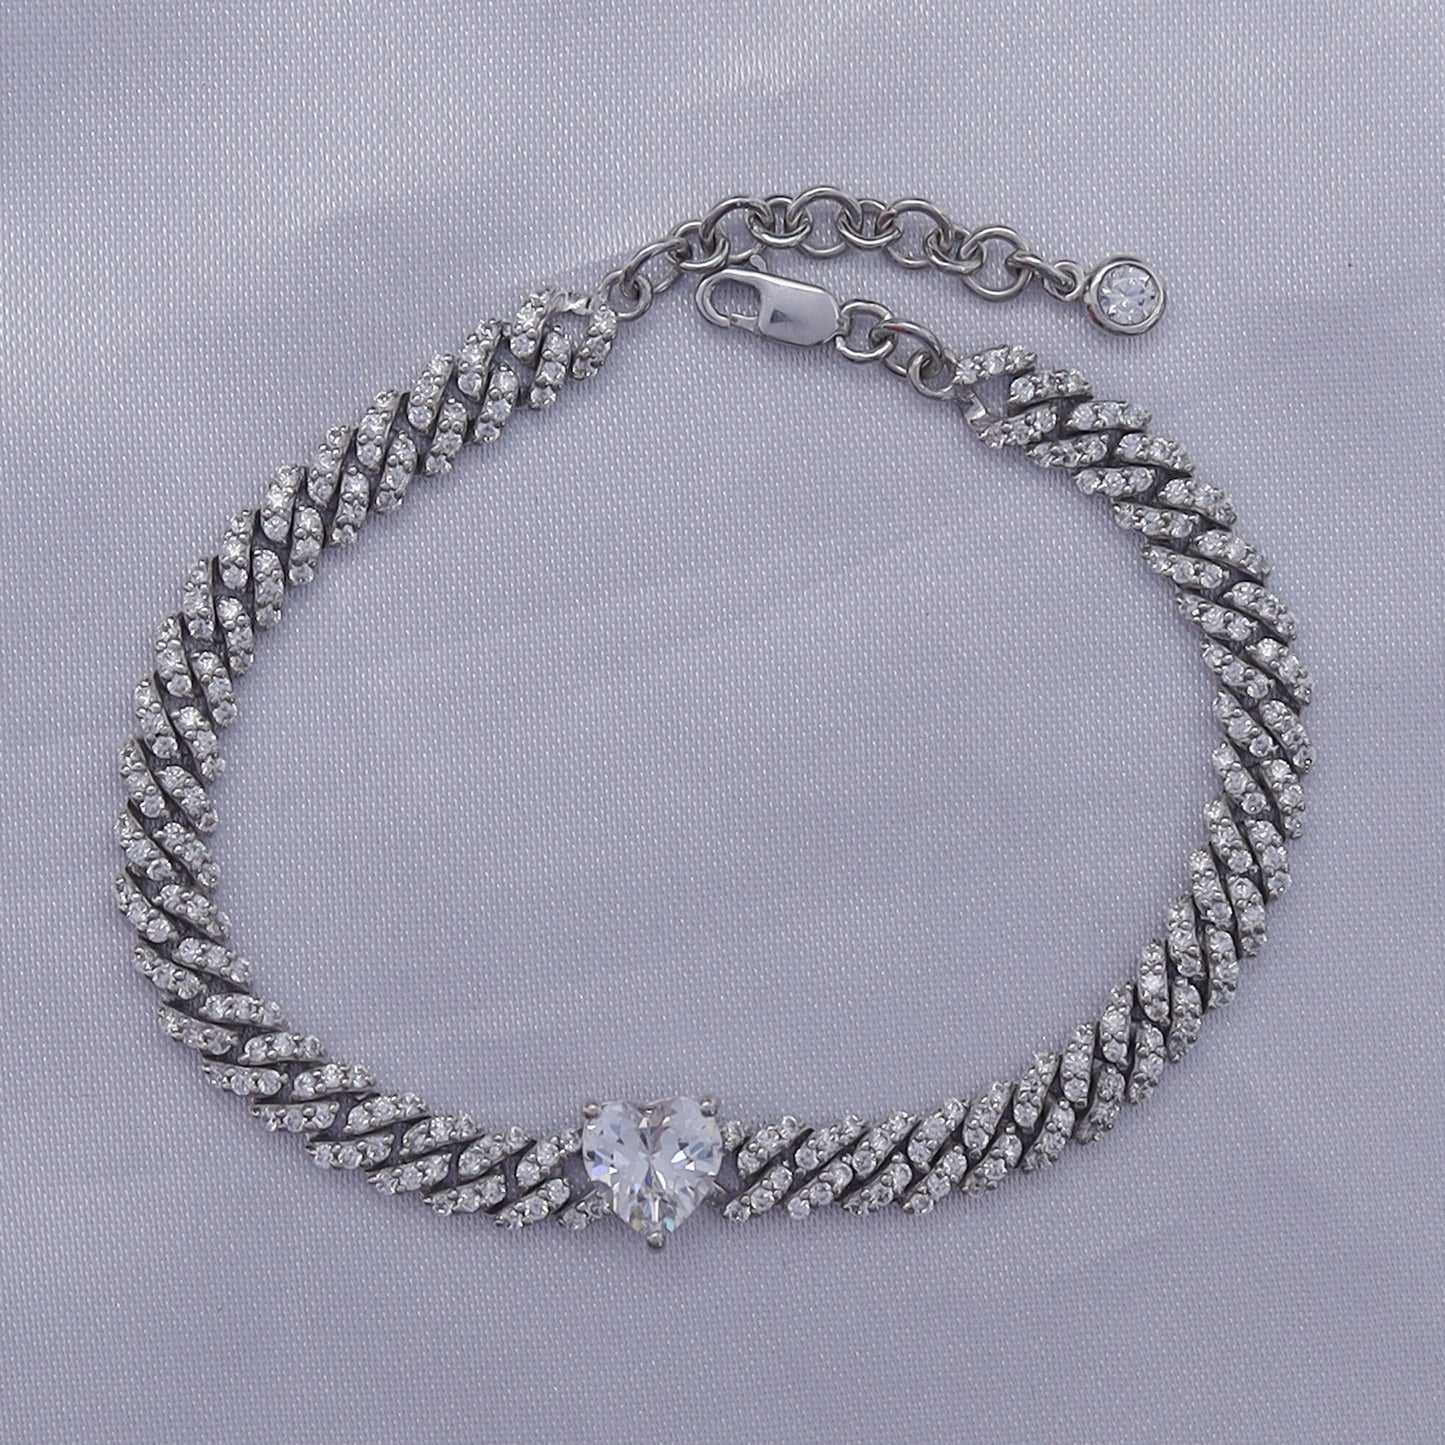 Heart & Round Cut Sparkling White Cubic Zirconia Adjustable Single Row Cuban Chain Bracelet In 925 Sterling Silver